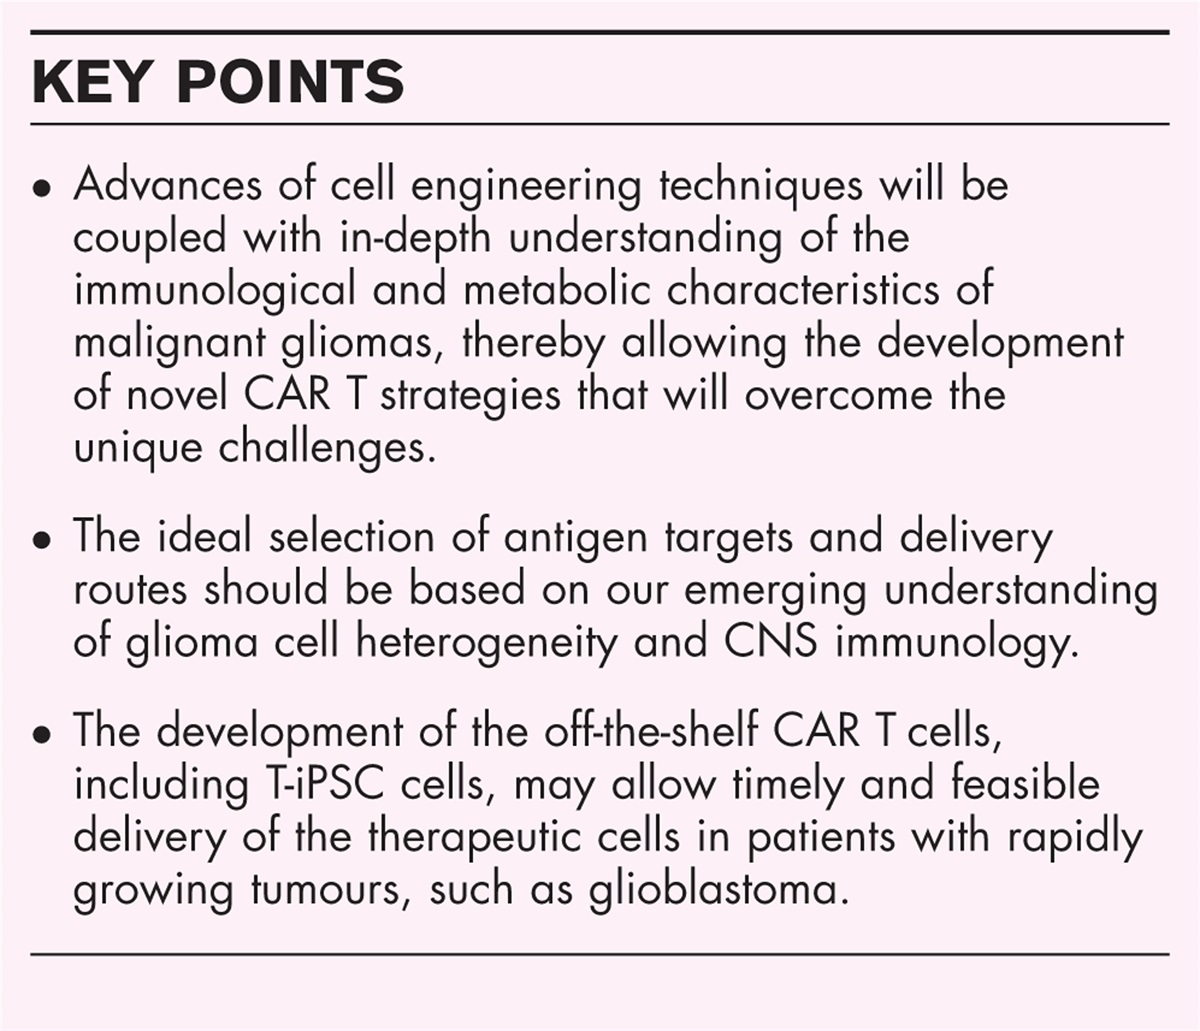 Future development of chimeric antigen receptor T cell therapies for patients suffering from malignant glioma